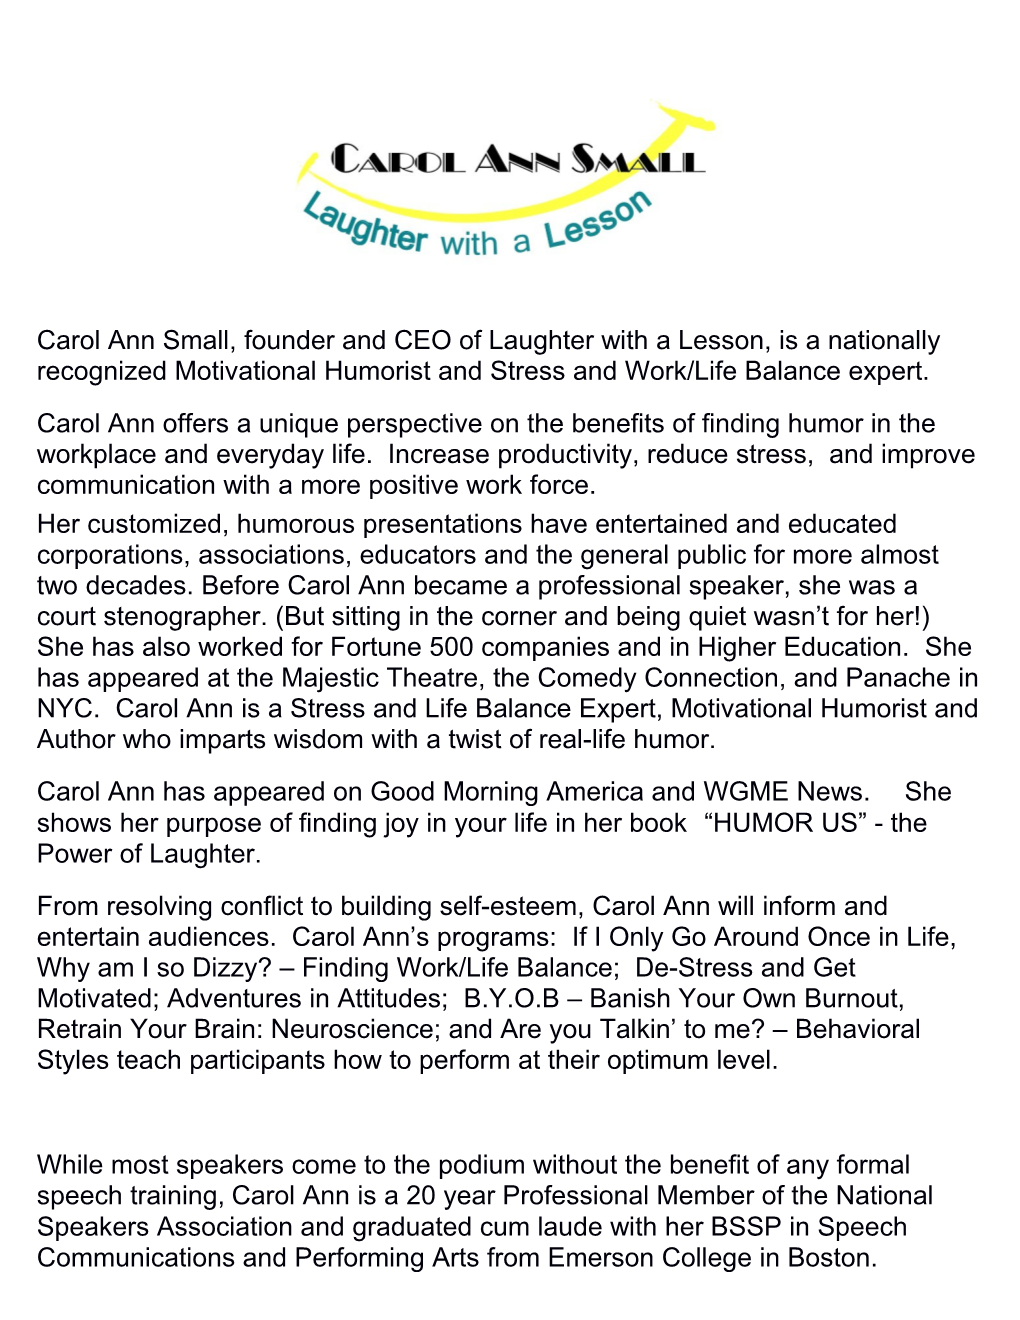 Carol Ann Small,Founder and CEO of Laughter with a Lesson, Is a Nationally Recognized